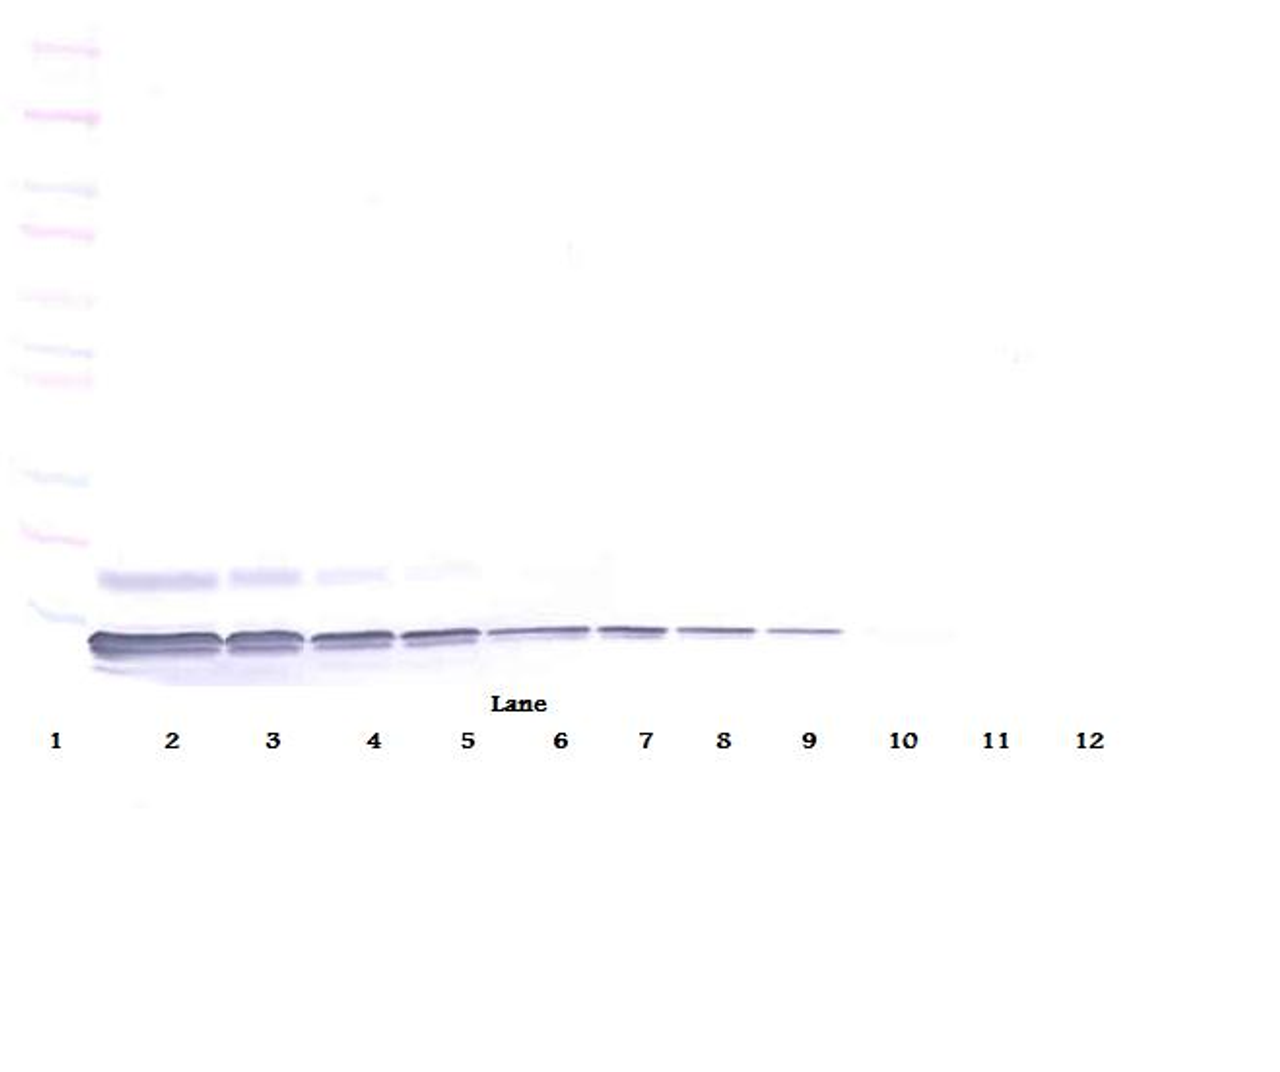 To detect Human SDF-1-alpha by Western Blot analysis this antibody can be used at a concentration of 0.1-0.2 ug/ml. When used in conjunction with compatible secondary reagents, the detection limit for recombinant Human SDF-1-alpha is 1.5-3.0 ng/lane, under either reducing or non-reducing conditions.